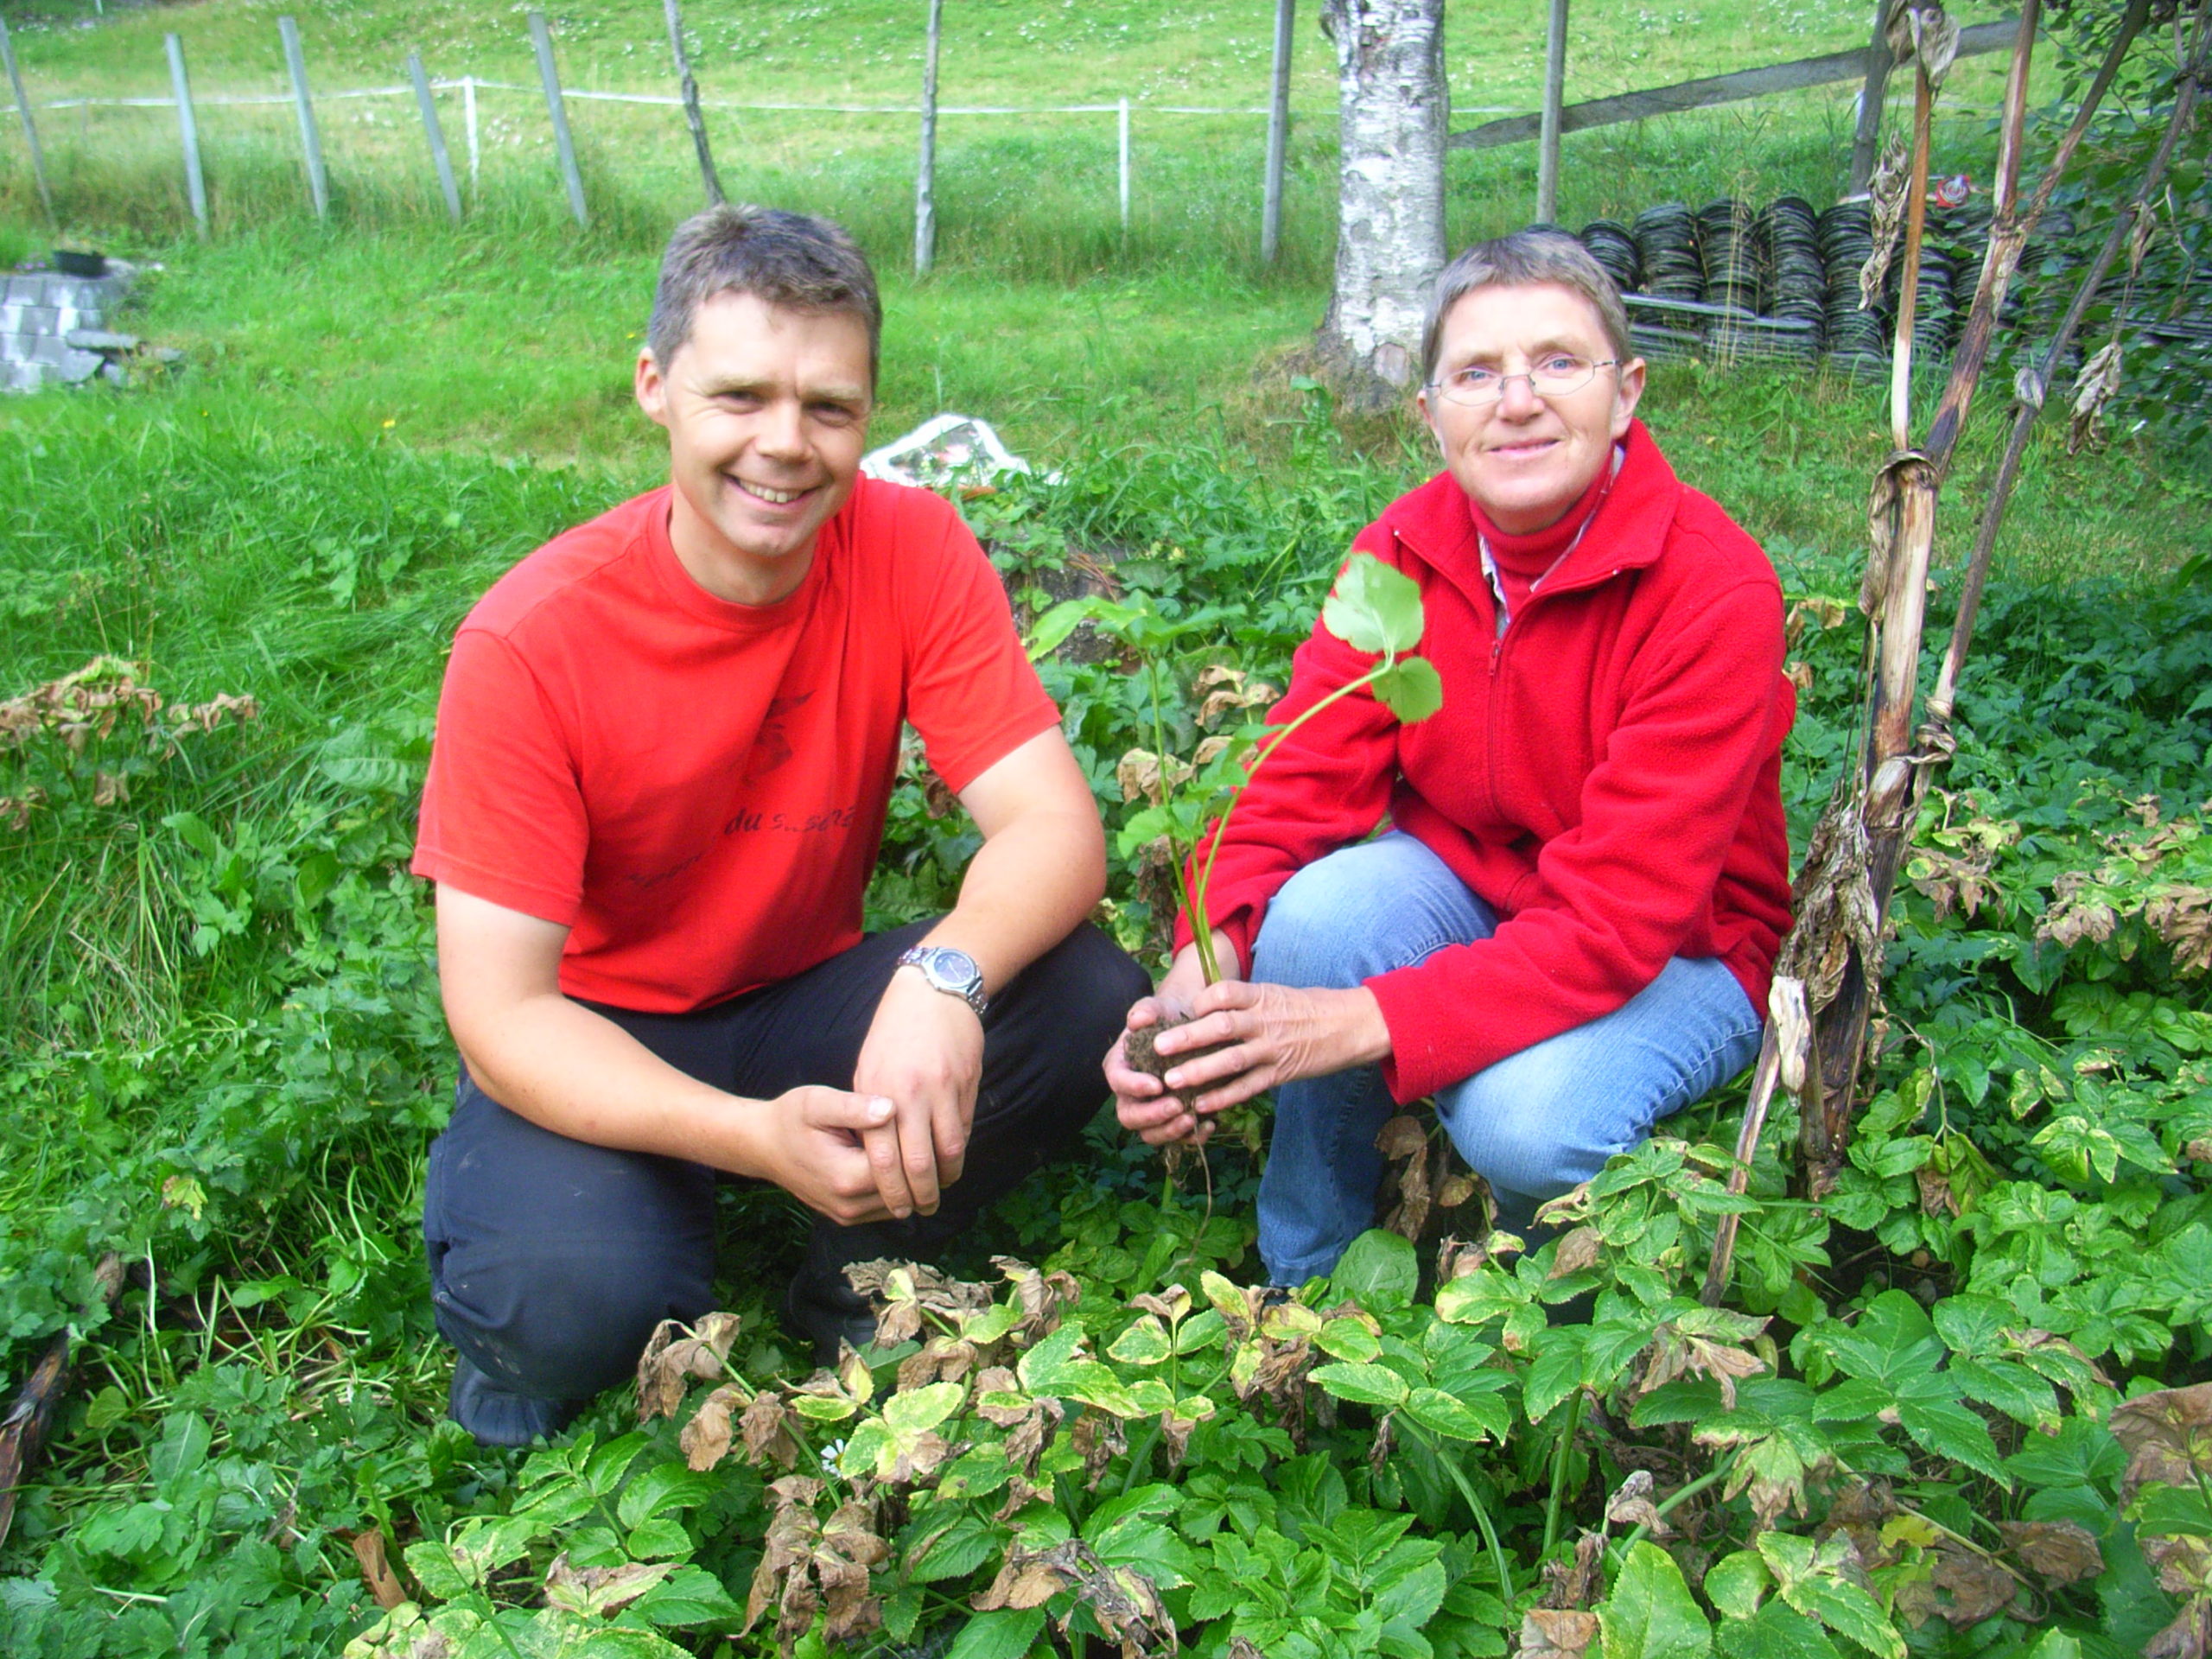 Image of two persons dressed in red shirts seated among green plants